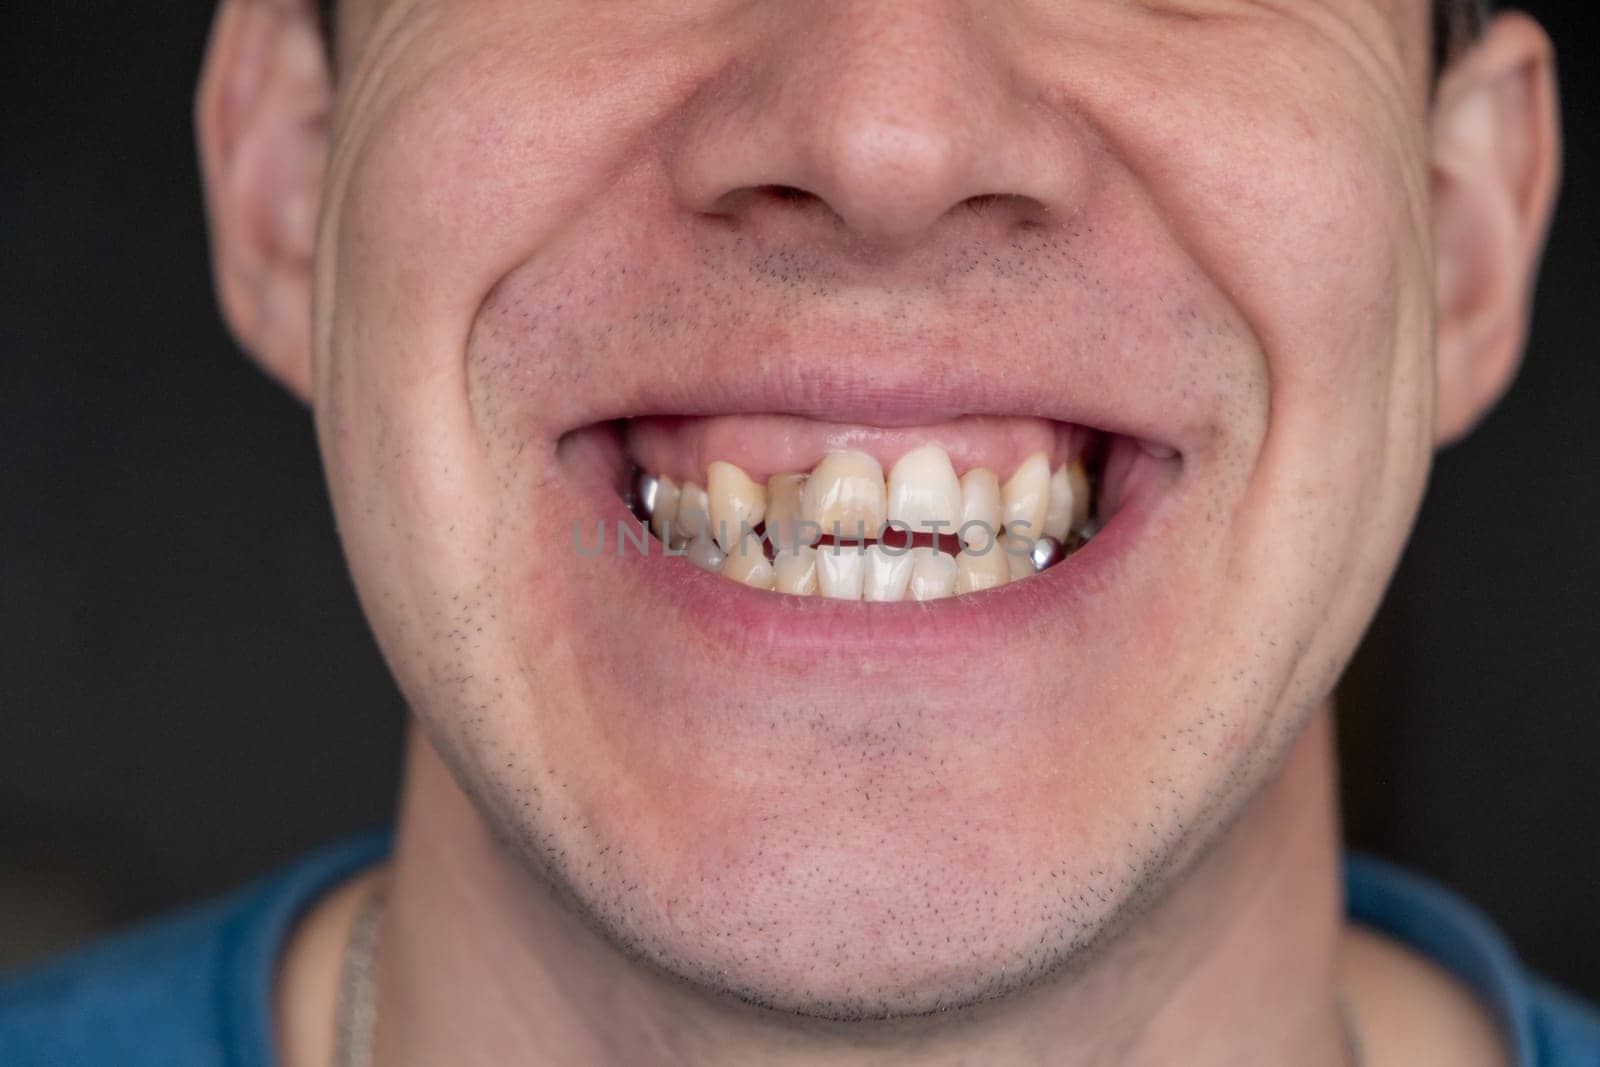 A man's crooked teeth. Young man showing crooked growing teeth. by AnatoliiFoto